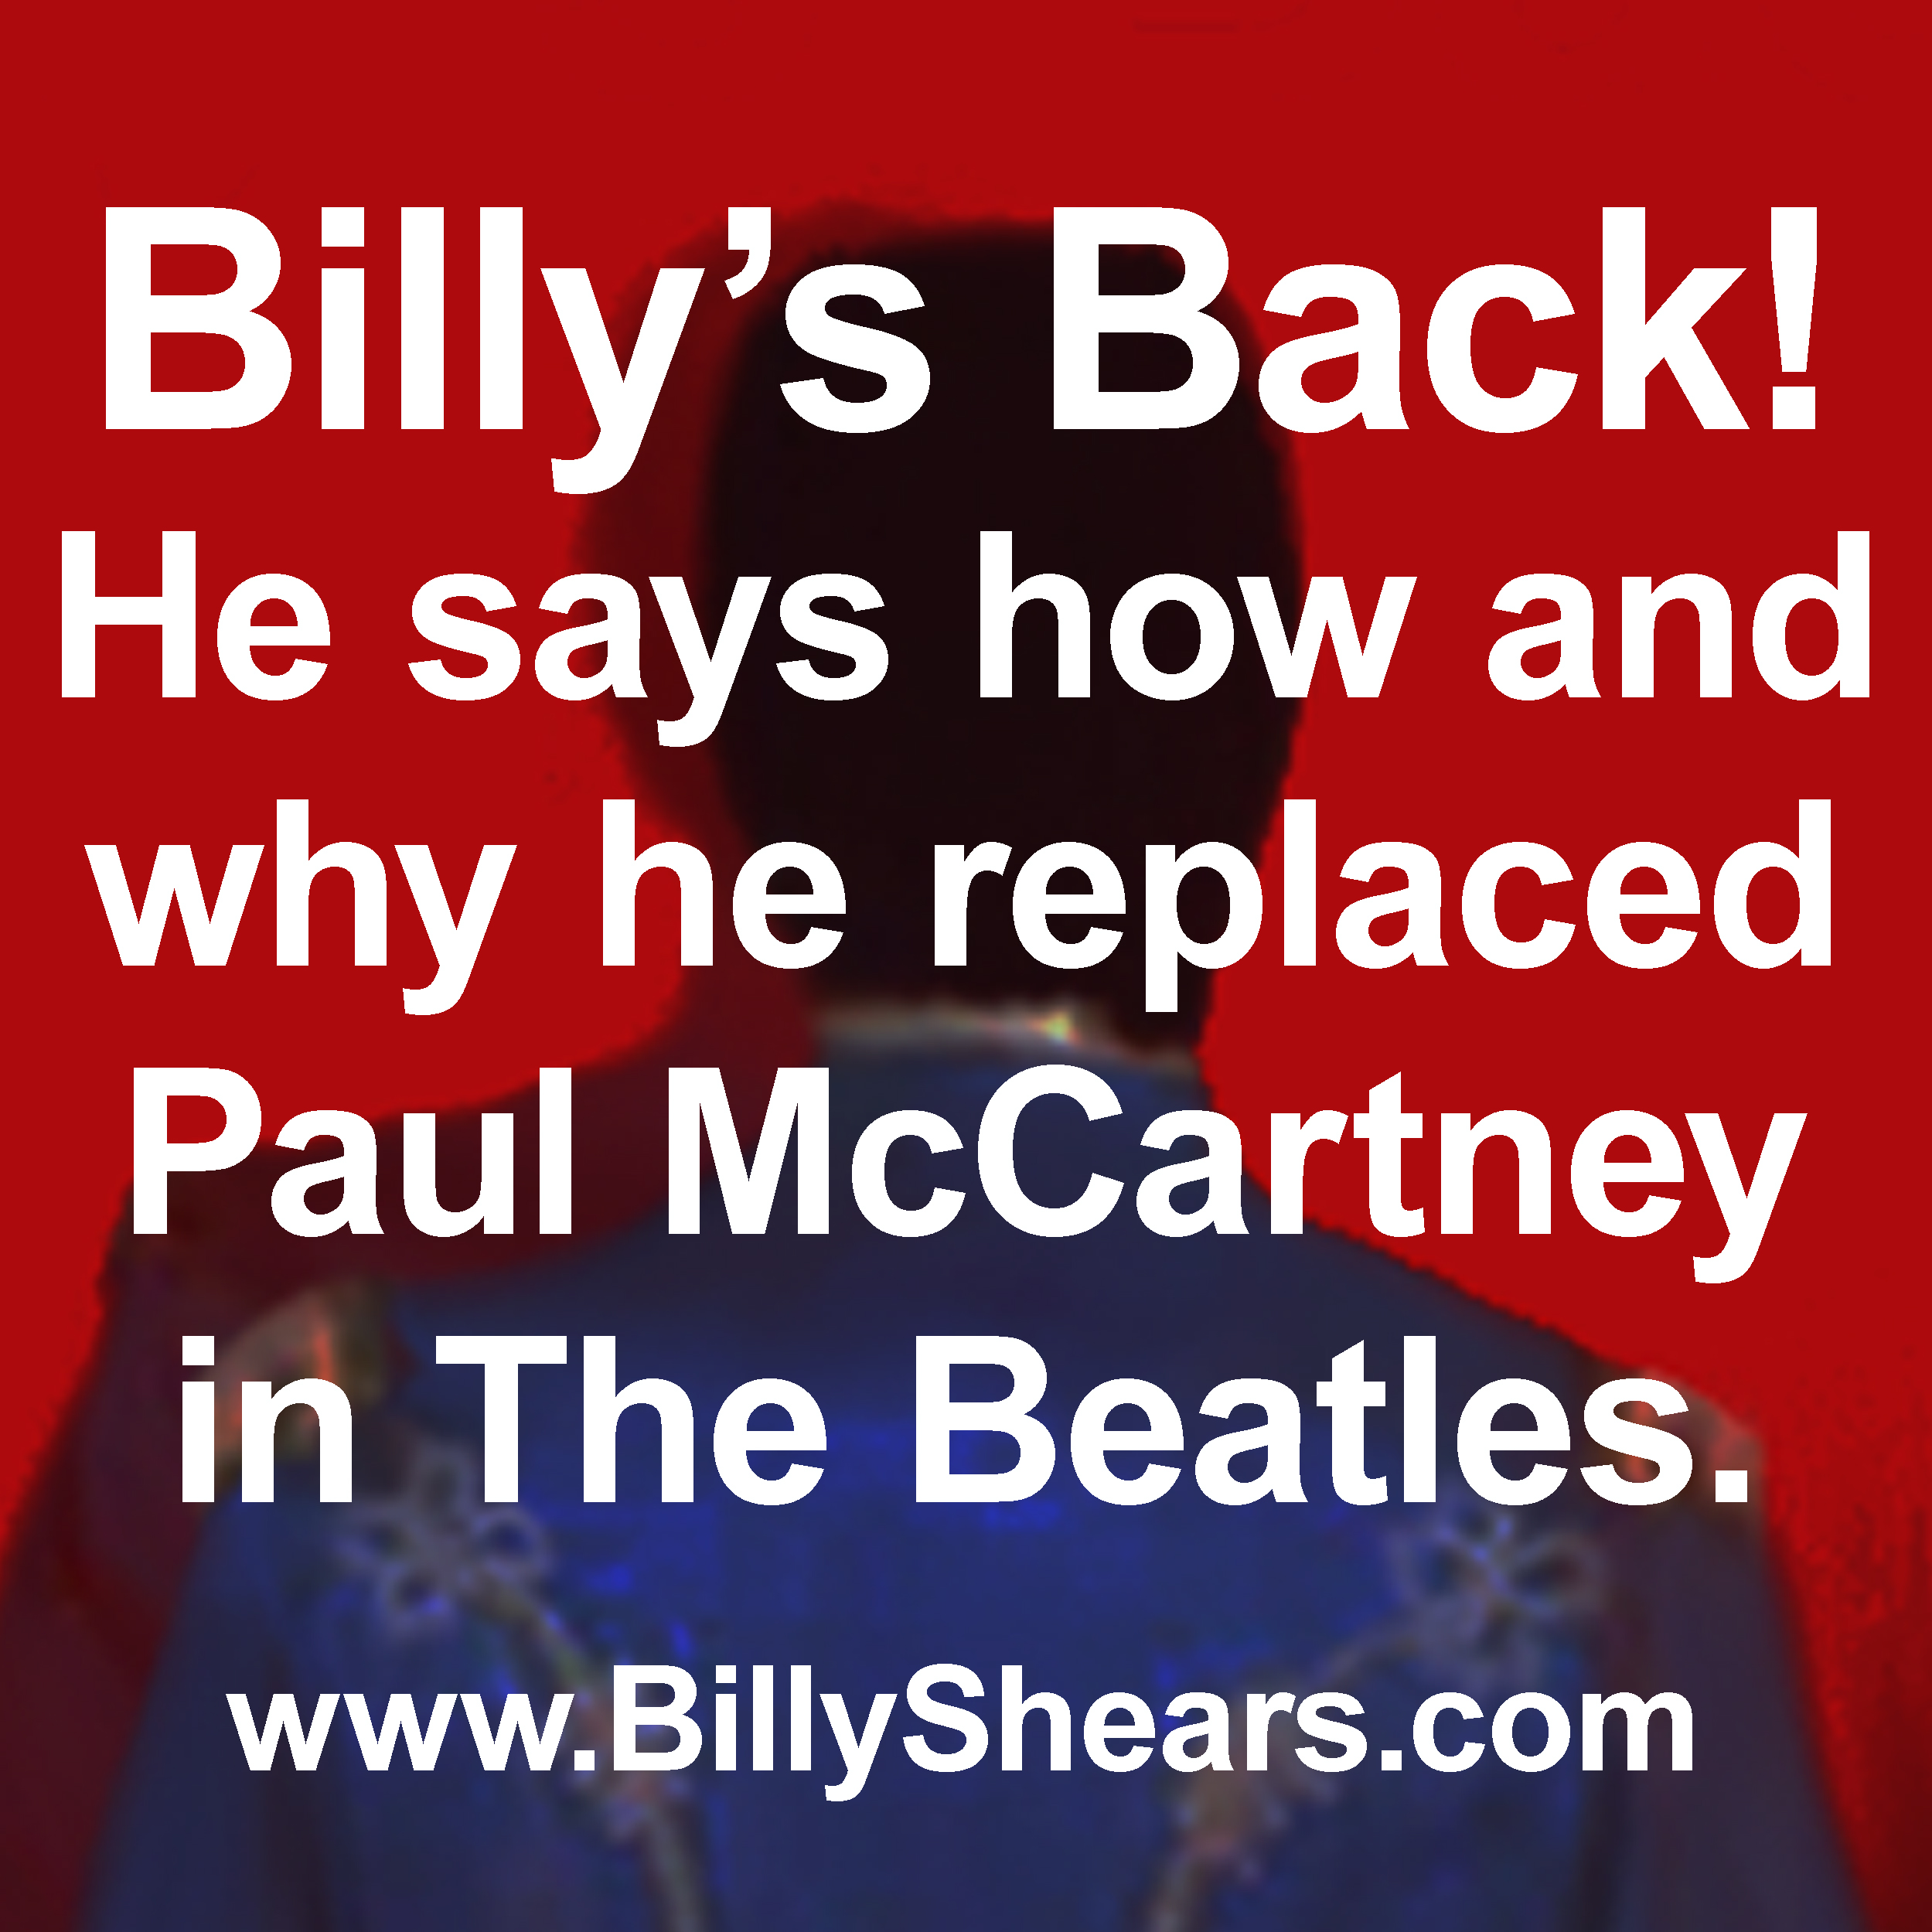 Billy's Back!  He says how and why he replaced Paul McCartney in The Beatles.